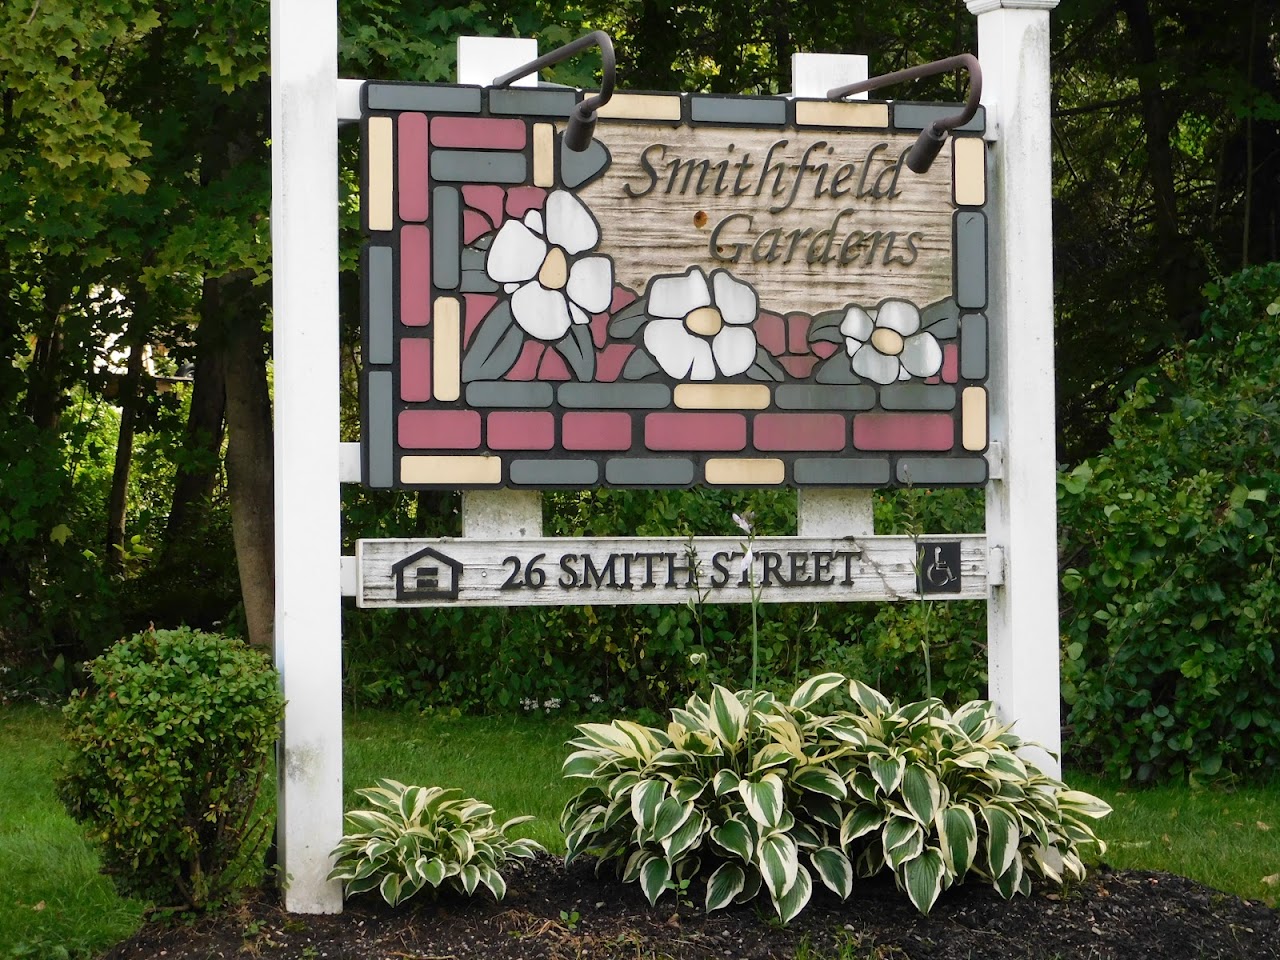 Photo of SMITHFIELD GARDENS ASSISTED LIVING. Affordable housing located at 26 SMITH ST SEYMOUR, CT 06483